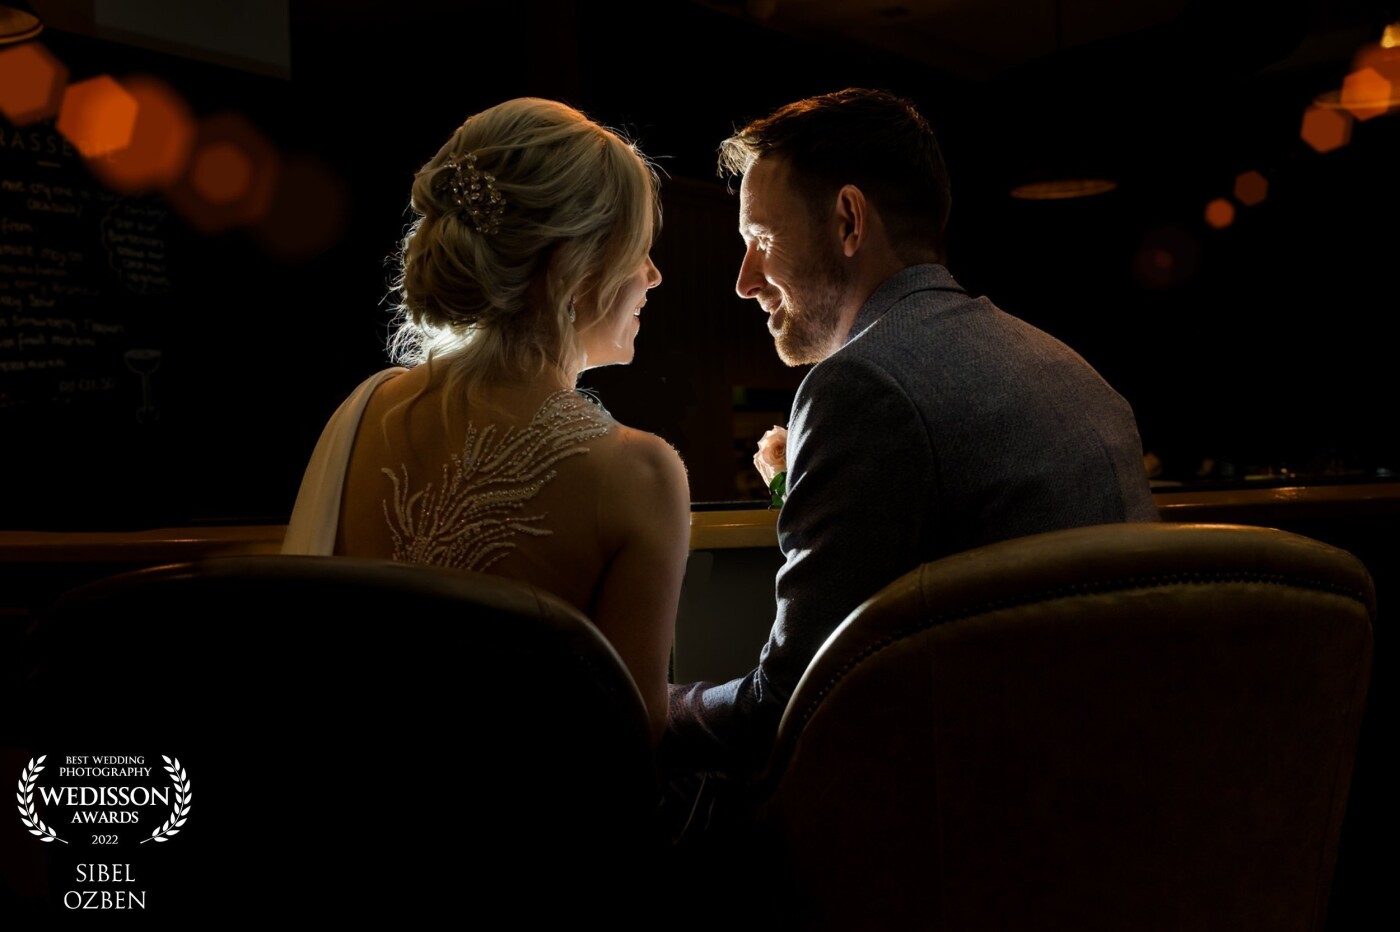 This romantic moment was captured just before the bride and groom entered to their dining room.  They set at the bar having a quite romantic moment to themselves.